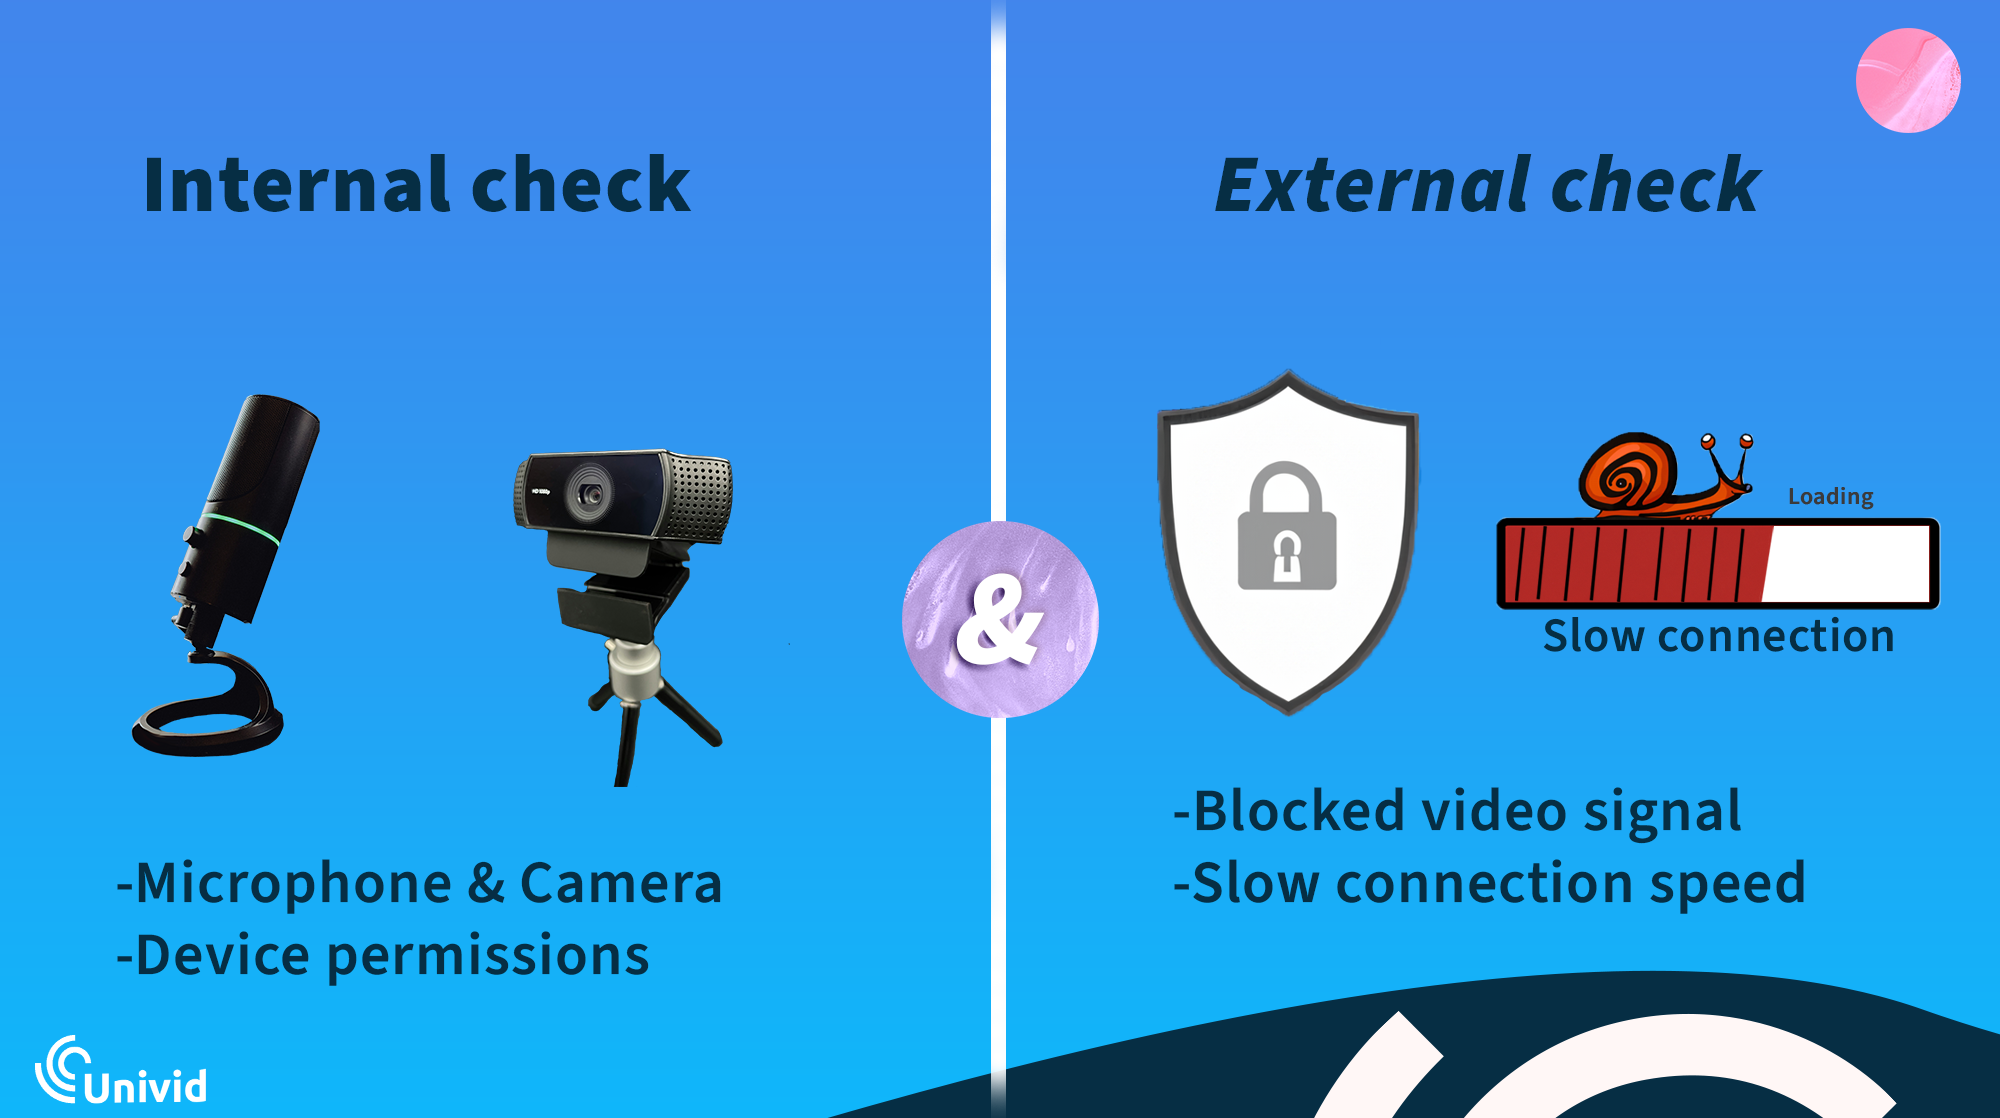 Both internal and external factors must be checked for micrphone and camera during webinars or meetings. Device permissions, firewalls blocking video signals or slow internet connection are common pitfalls.